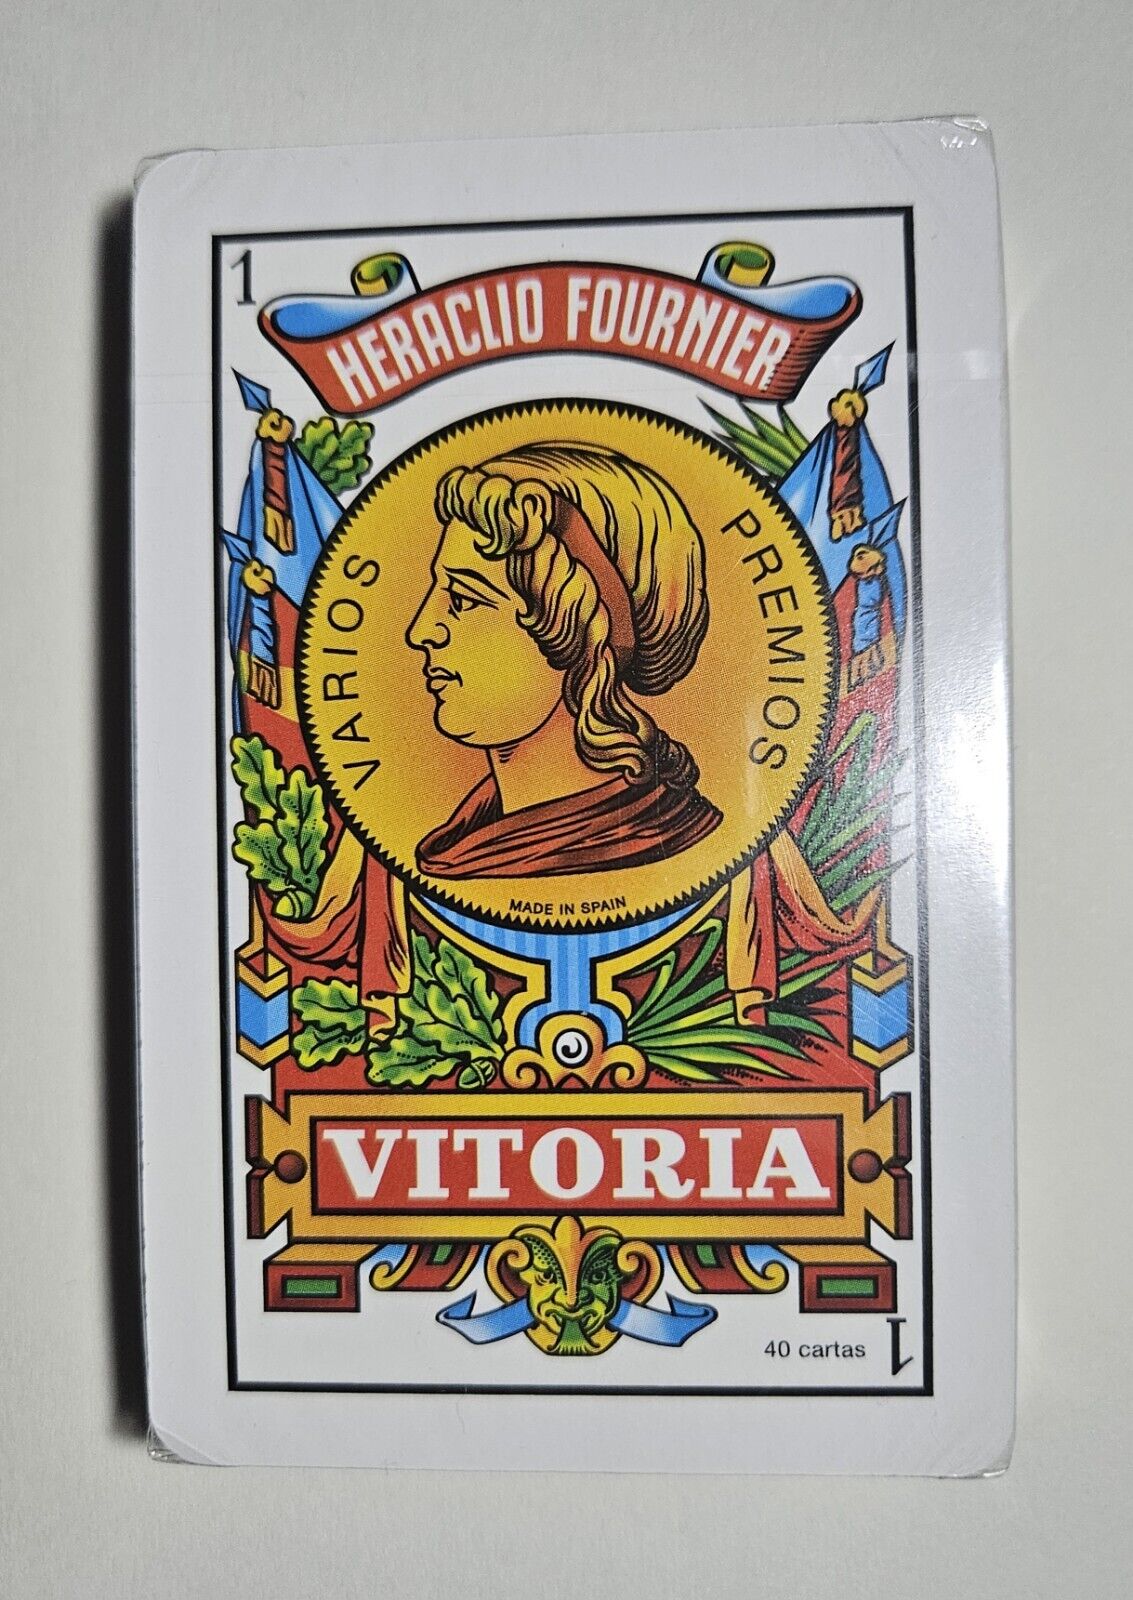 Vintage Heraclio Fournier Vitoria Playing Cards  Sealed Deck 40 Cards